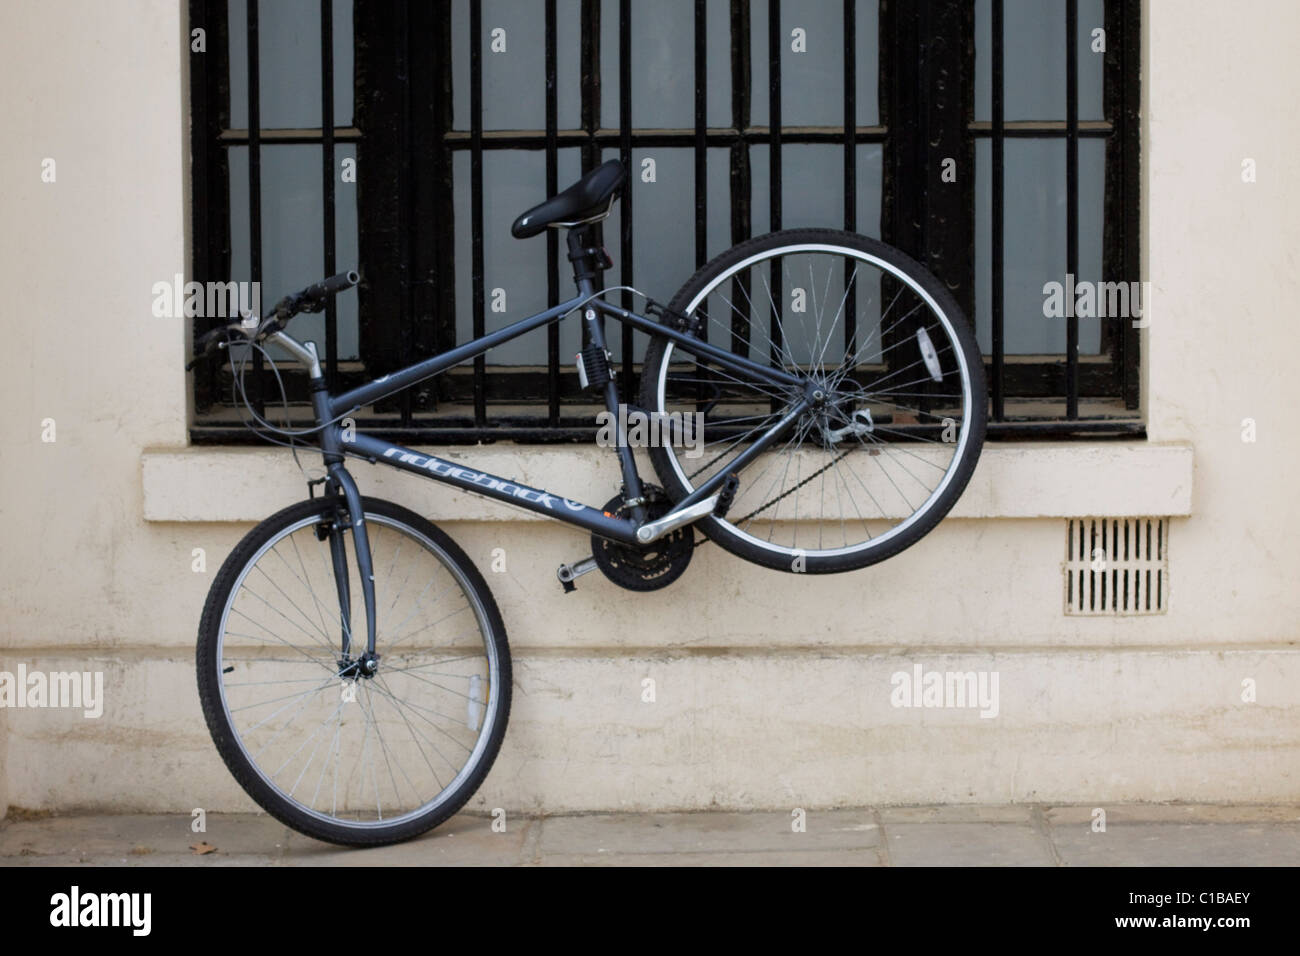 A Bicycle Chained to the side of a building on The Mall in the city of London England Stock Photo